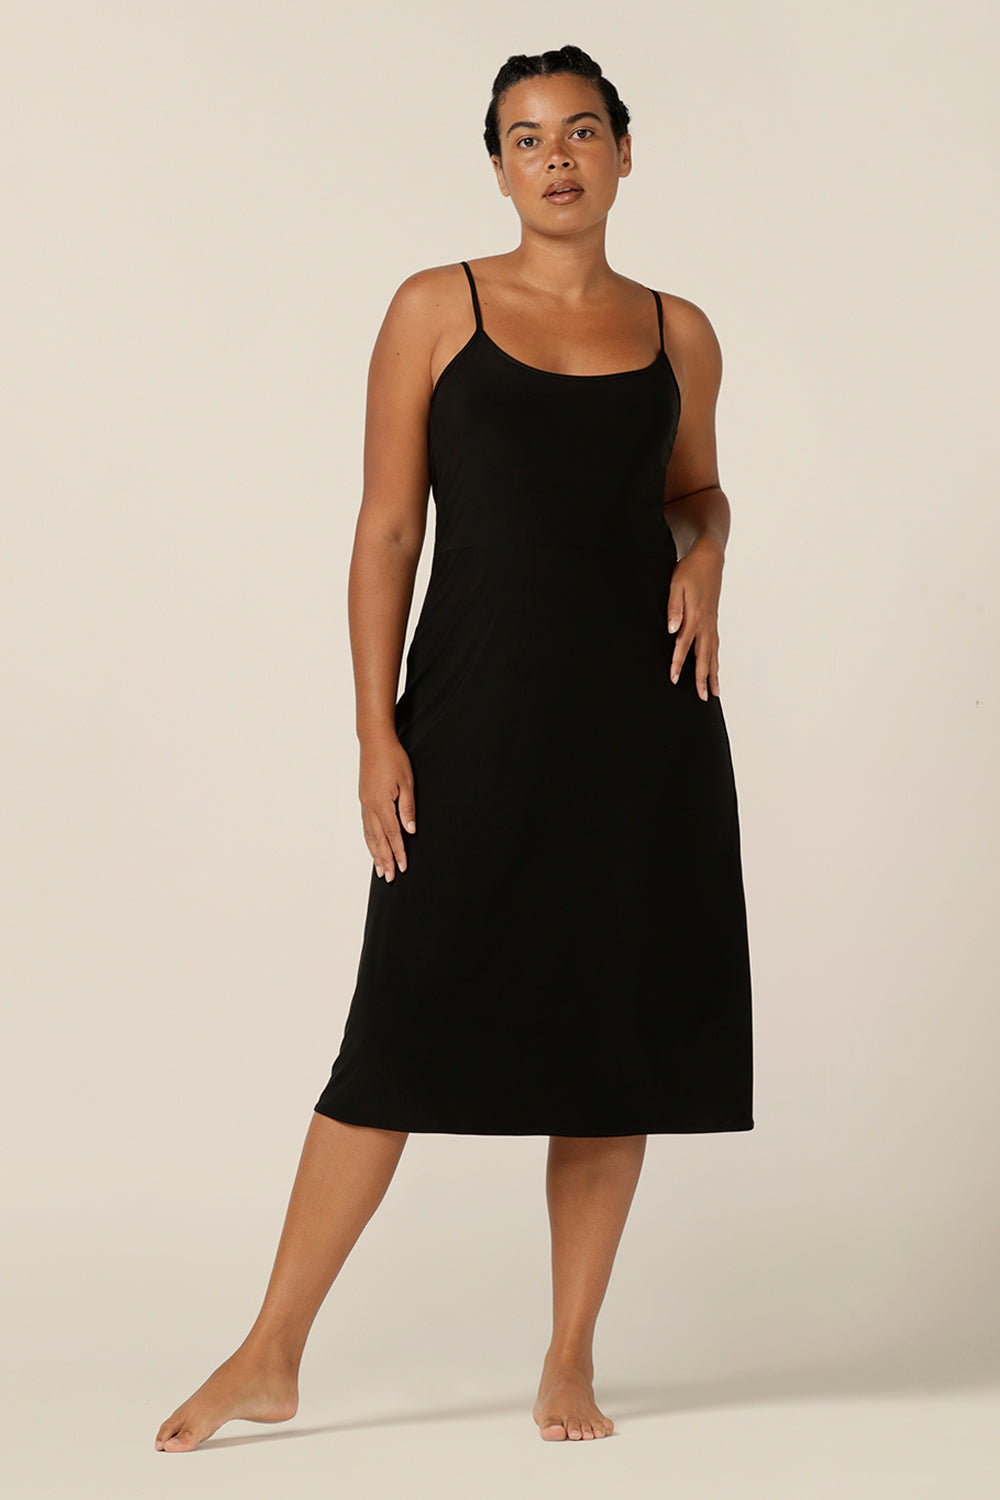 size 12 woman wears a midi-length, reversible slip in black, slinky jersey fabric. The slip has thin straps and is worn with a scoop neck to the front.